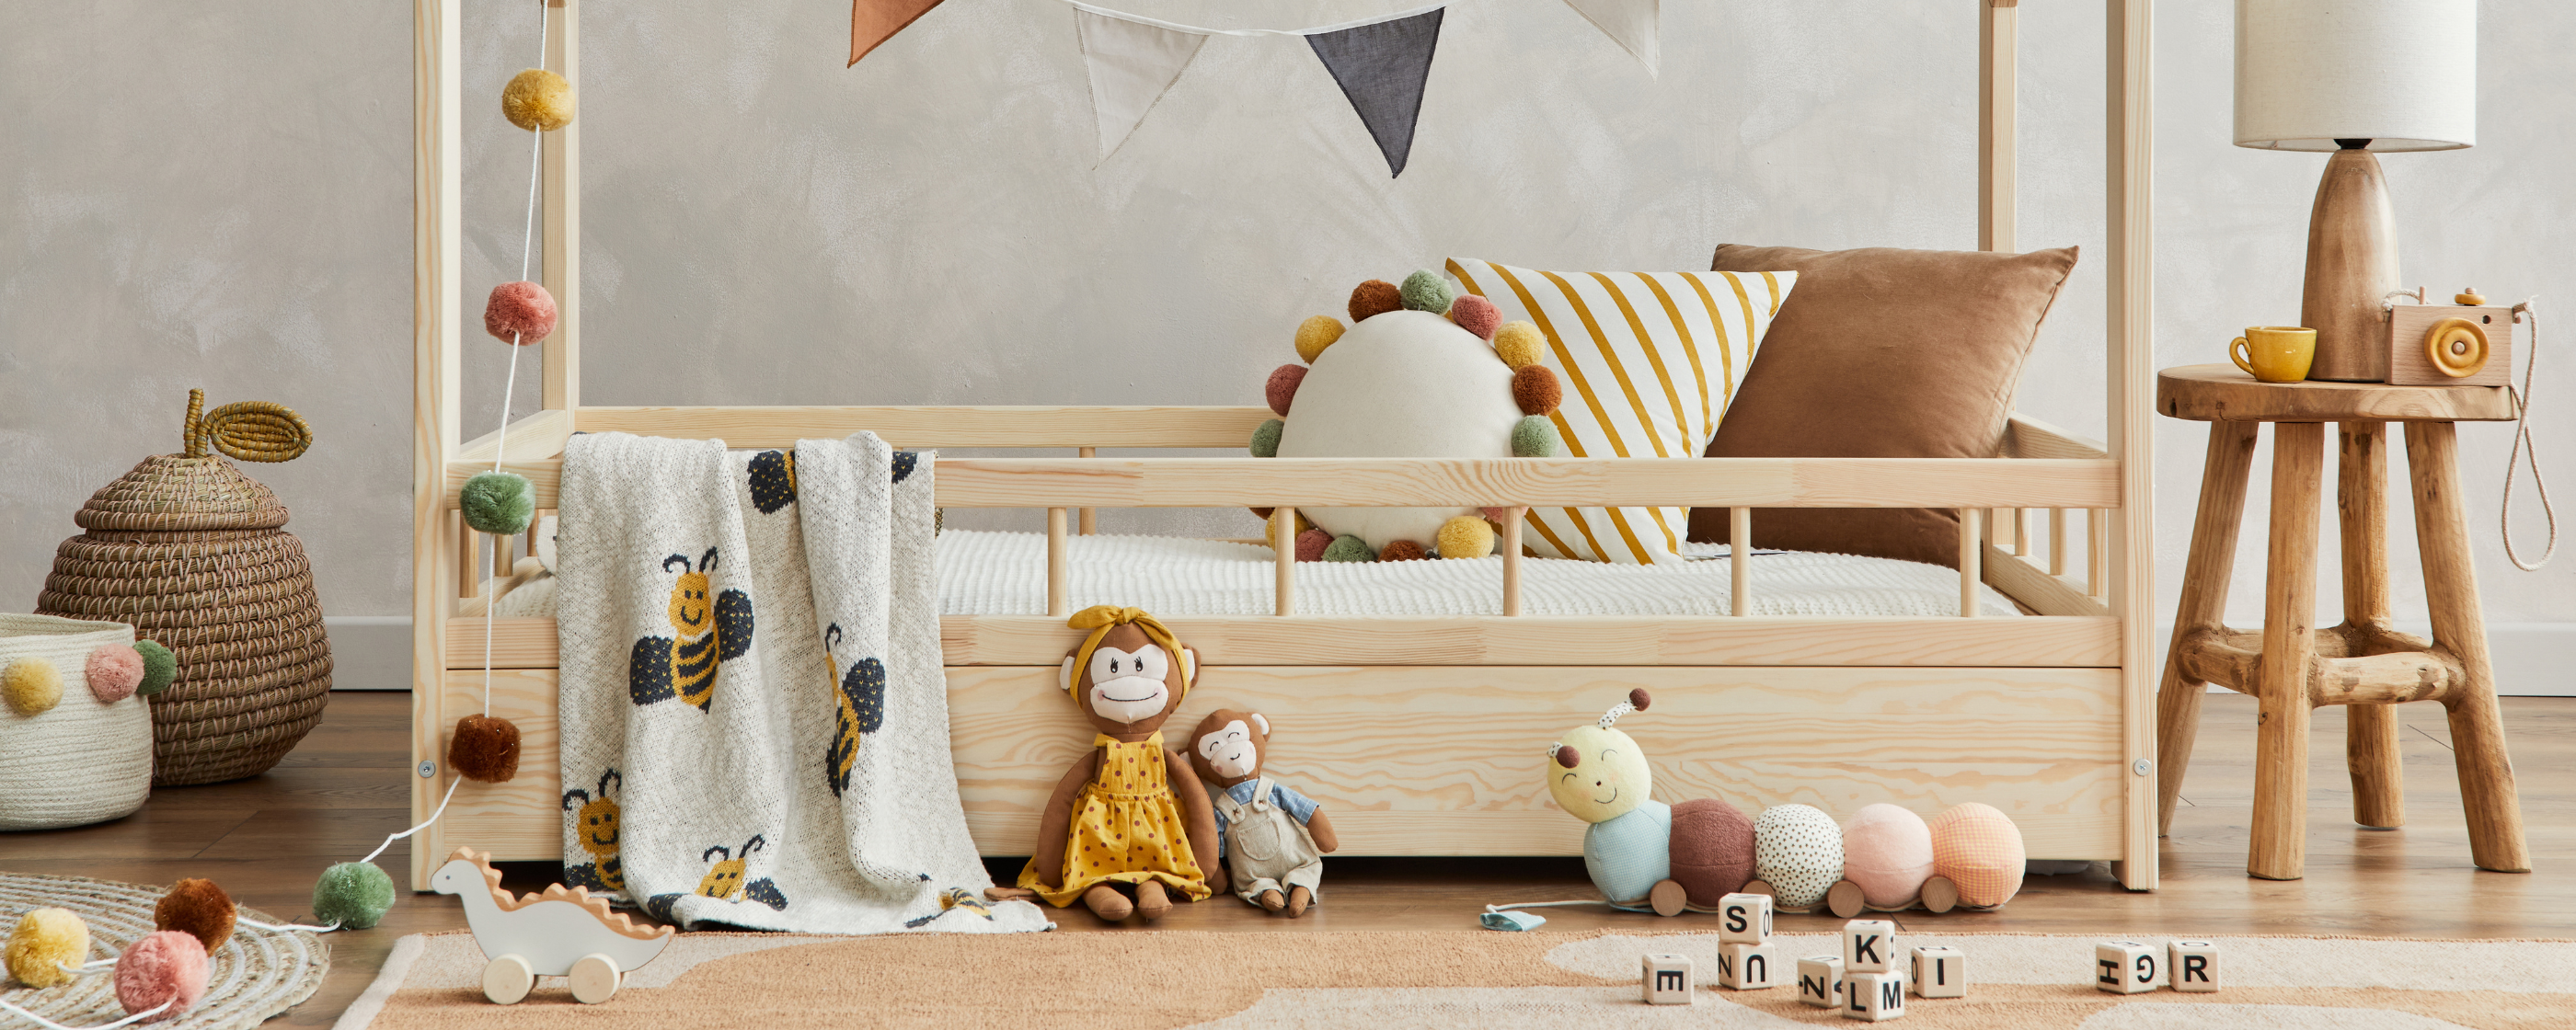 A child's room decorated with sustainable kids items and baby toys.